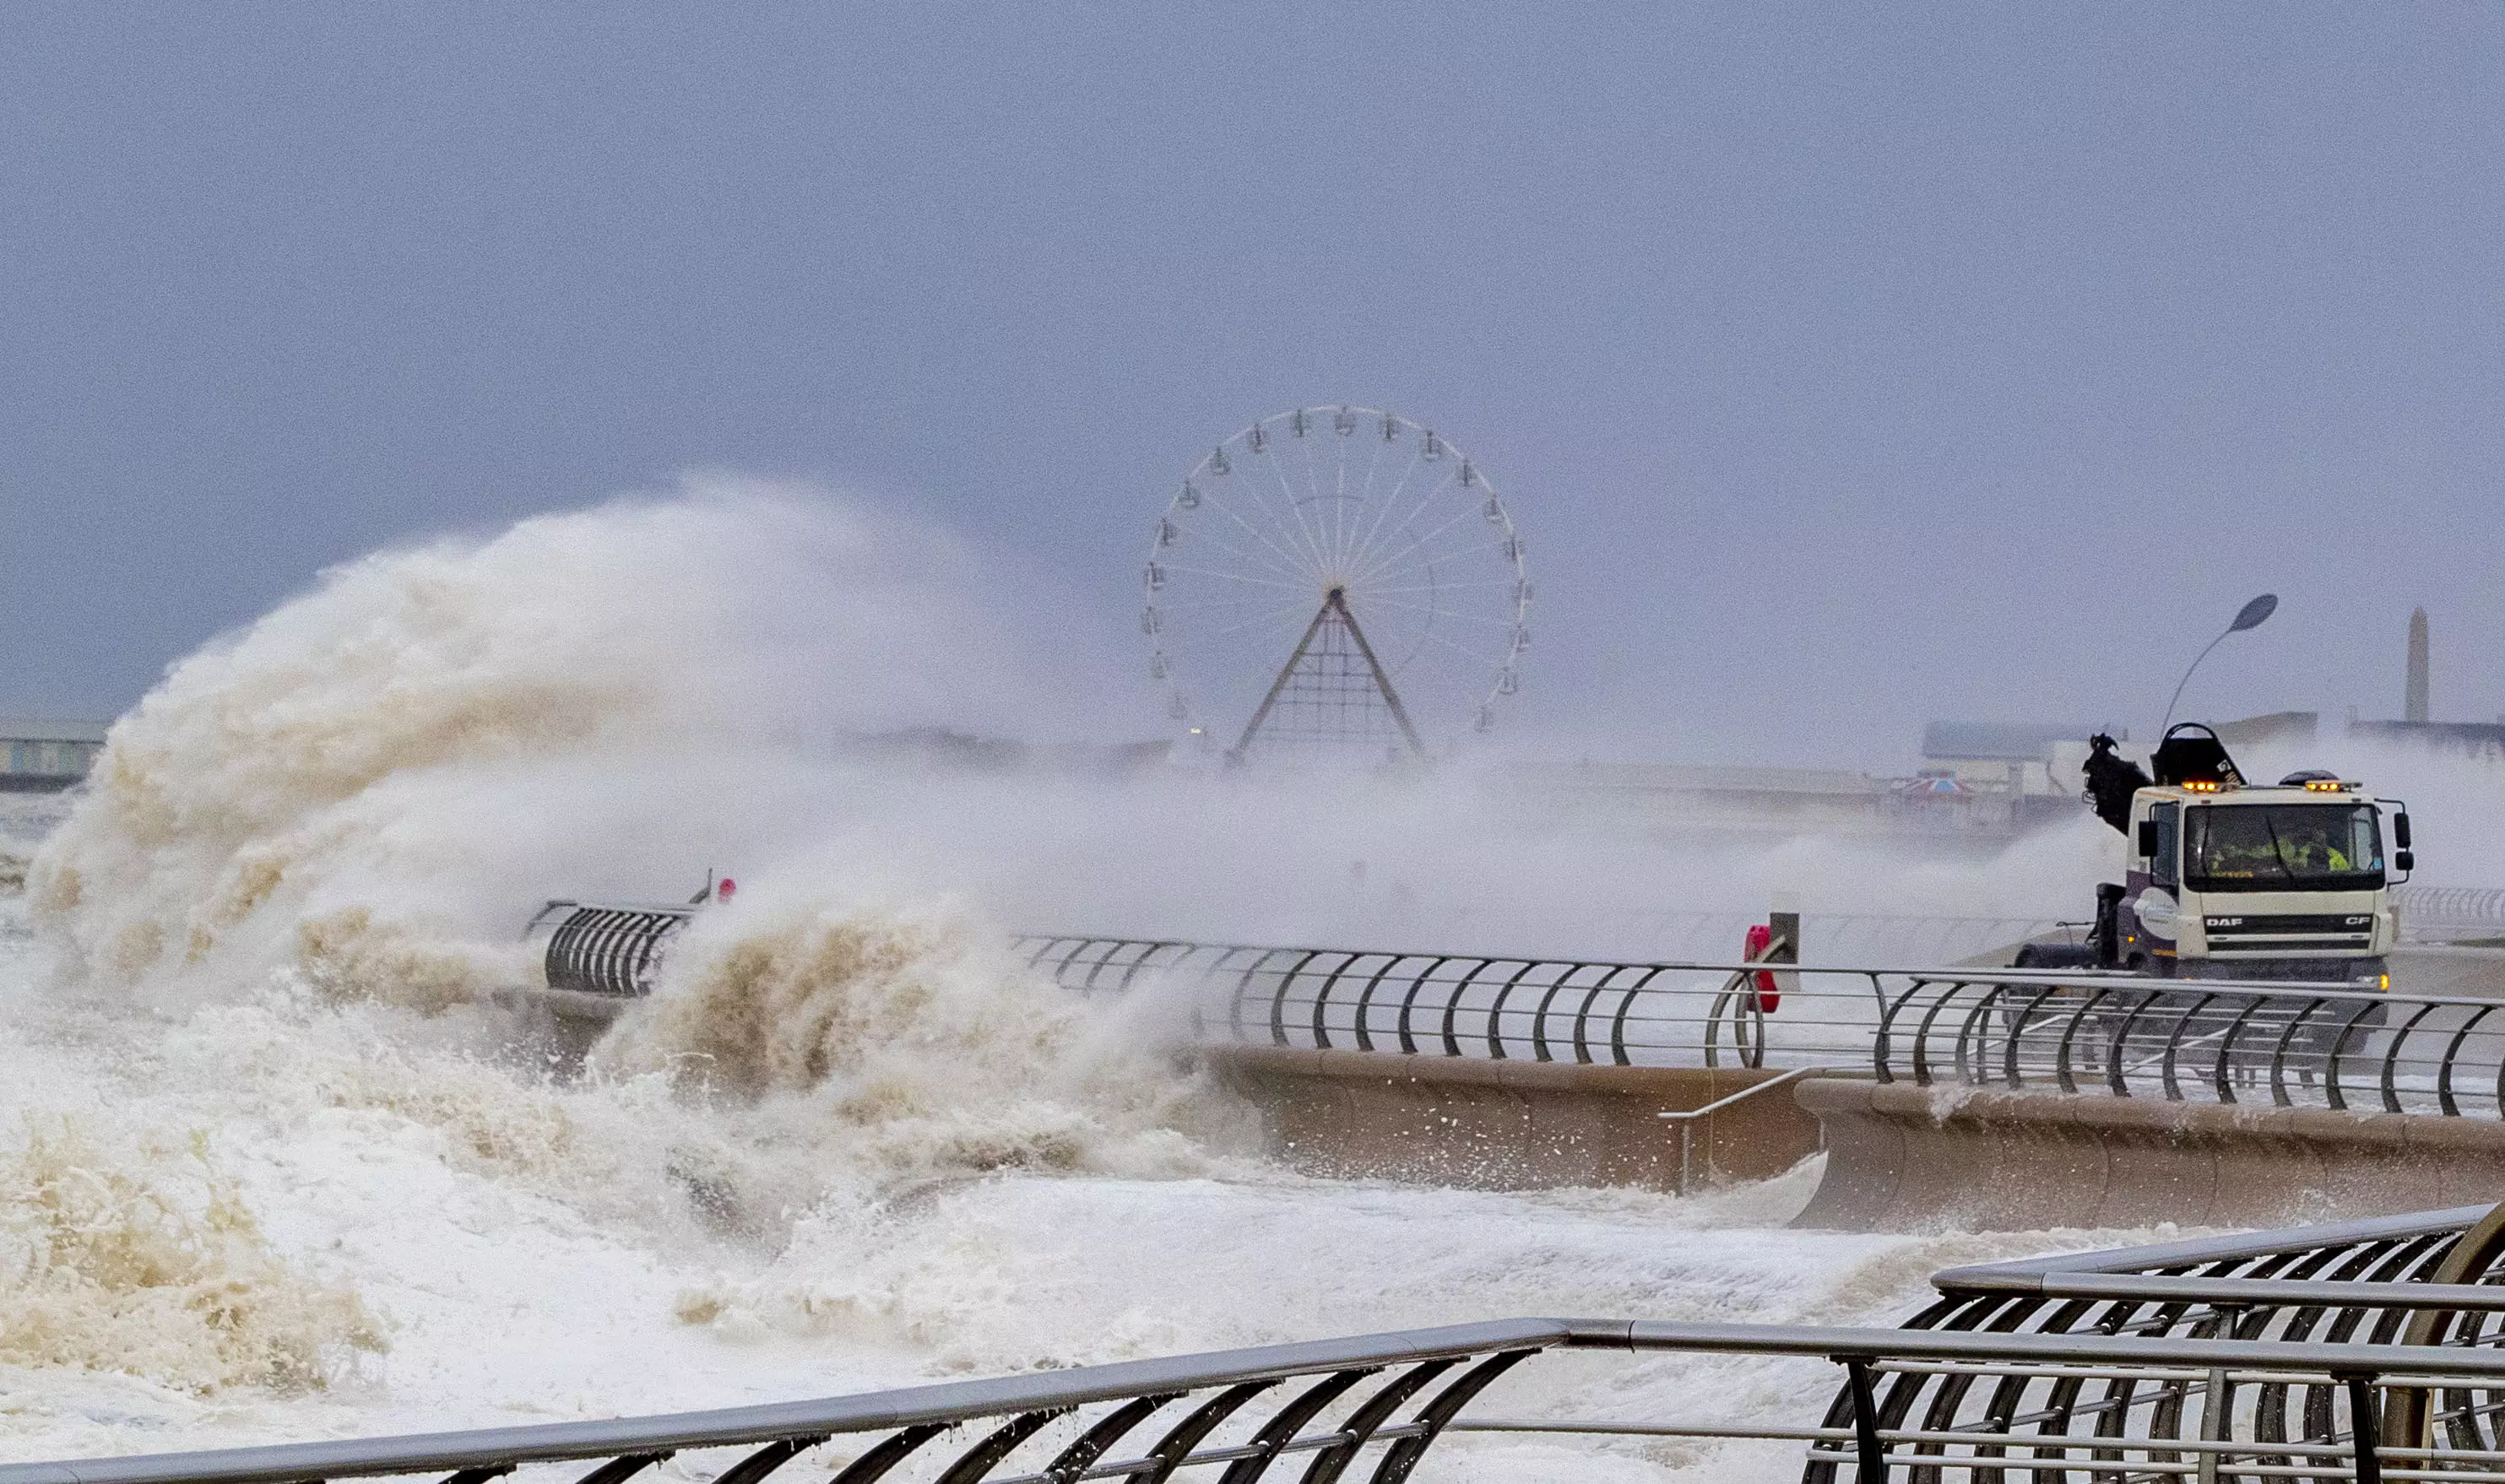 Waves crash over a lorry on Blackpool waterfront.